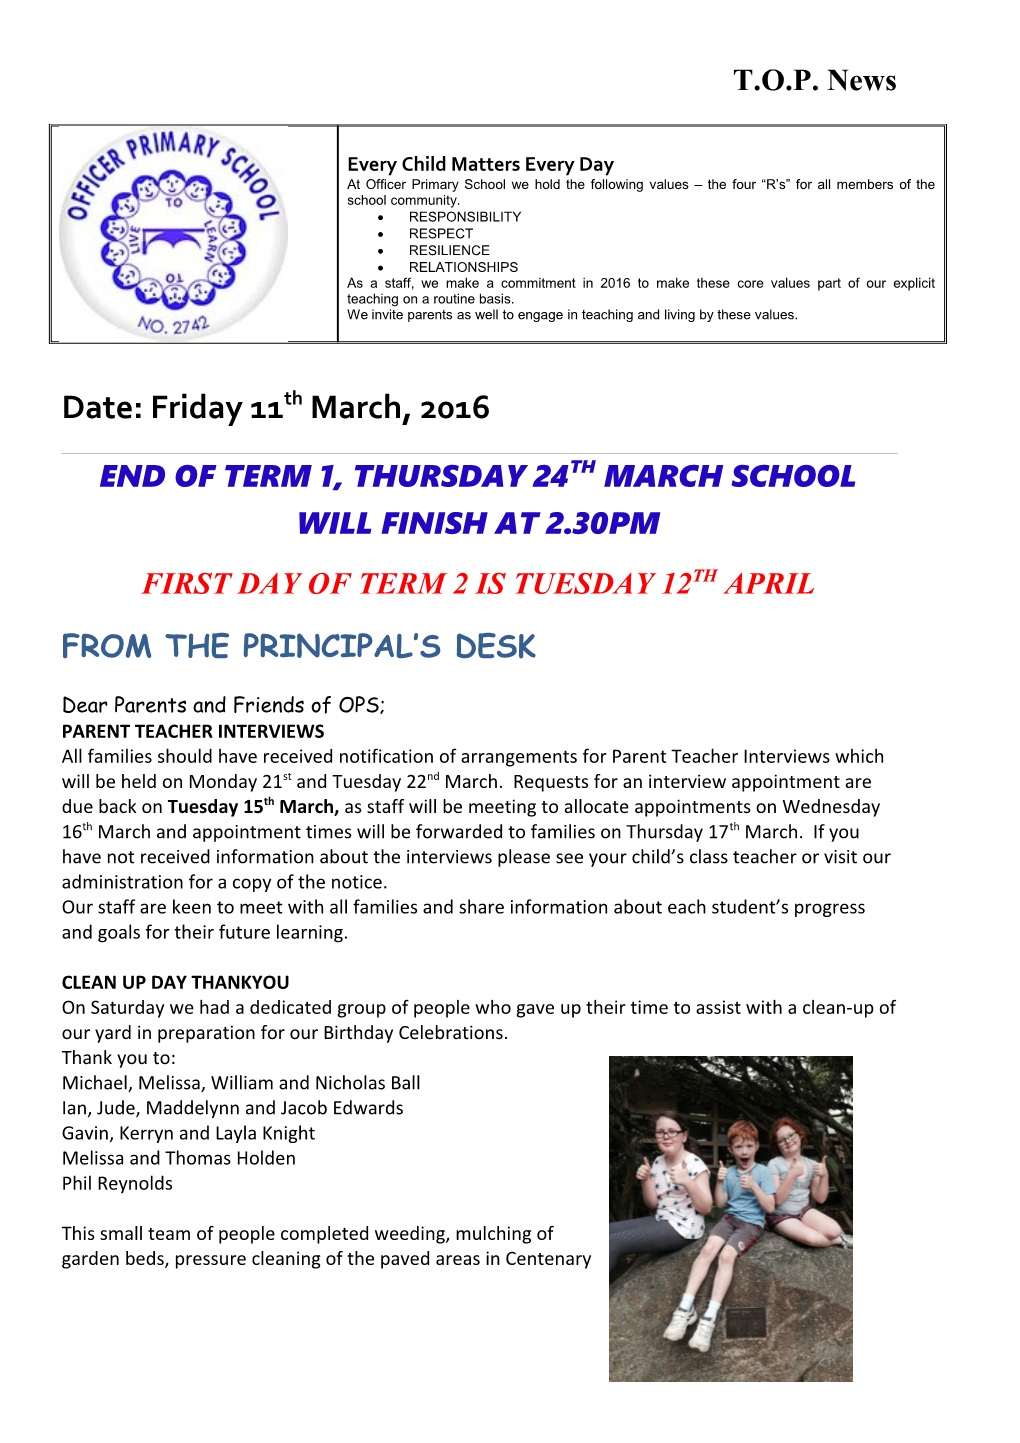 End of Term 1, Thursday 24Th March School Will Finish at 2.30Pm